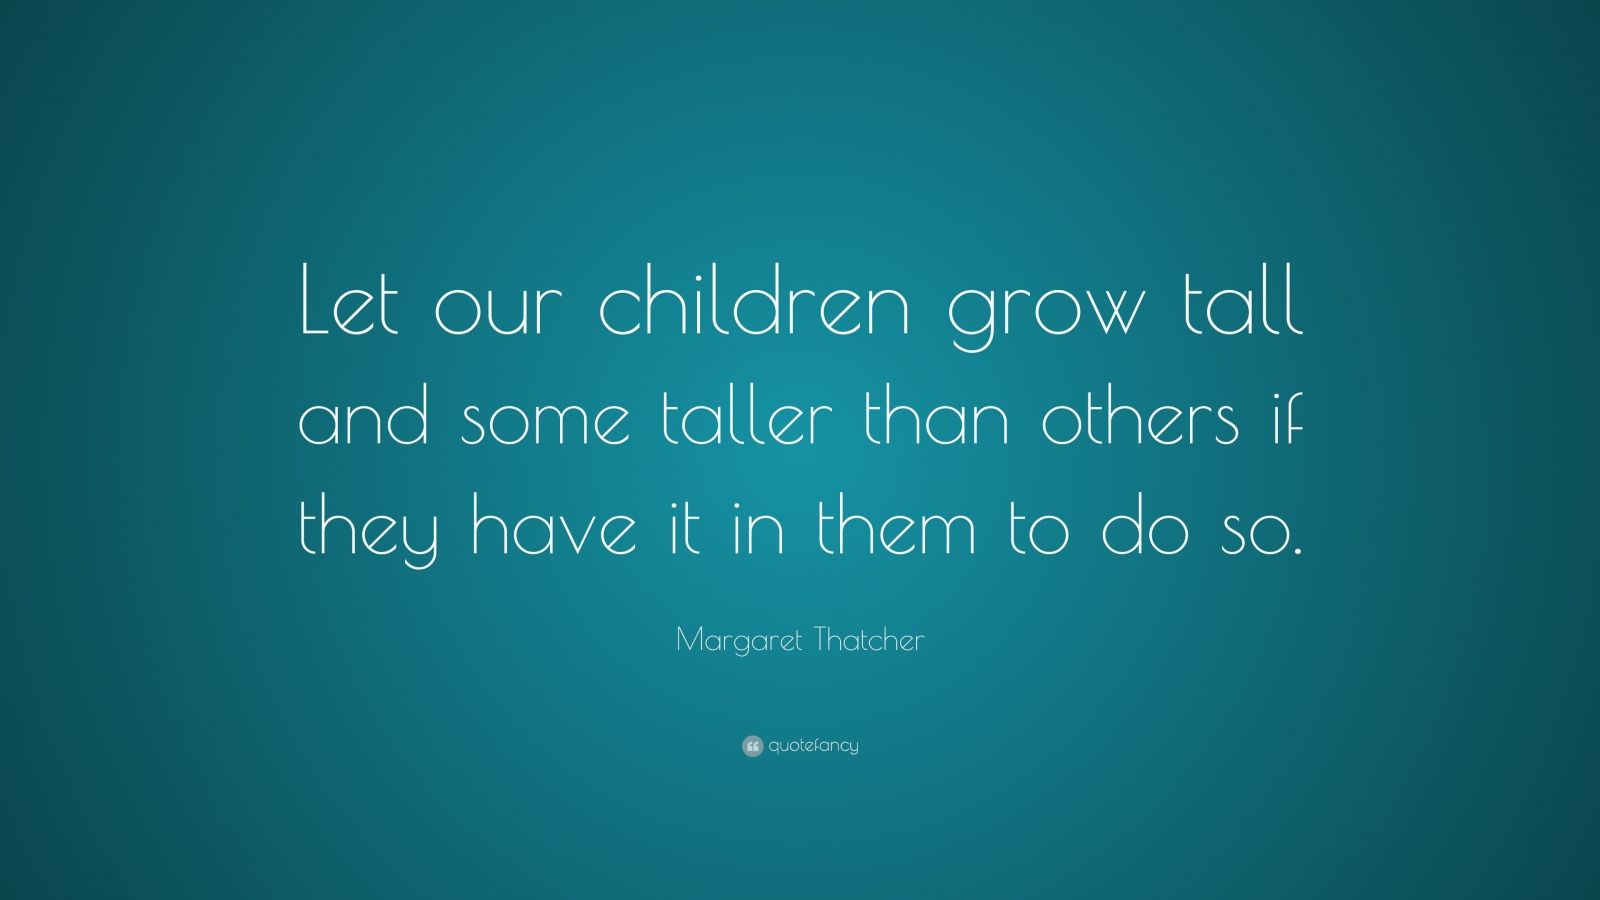 Margaret Thatcher Quote: “Let our children grow tall and some taller ...